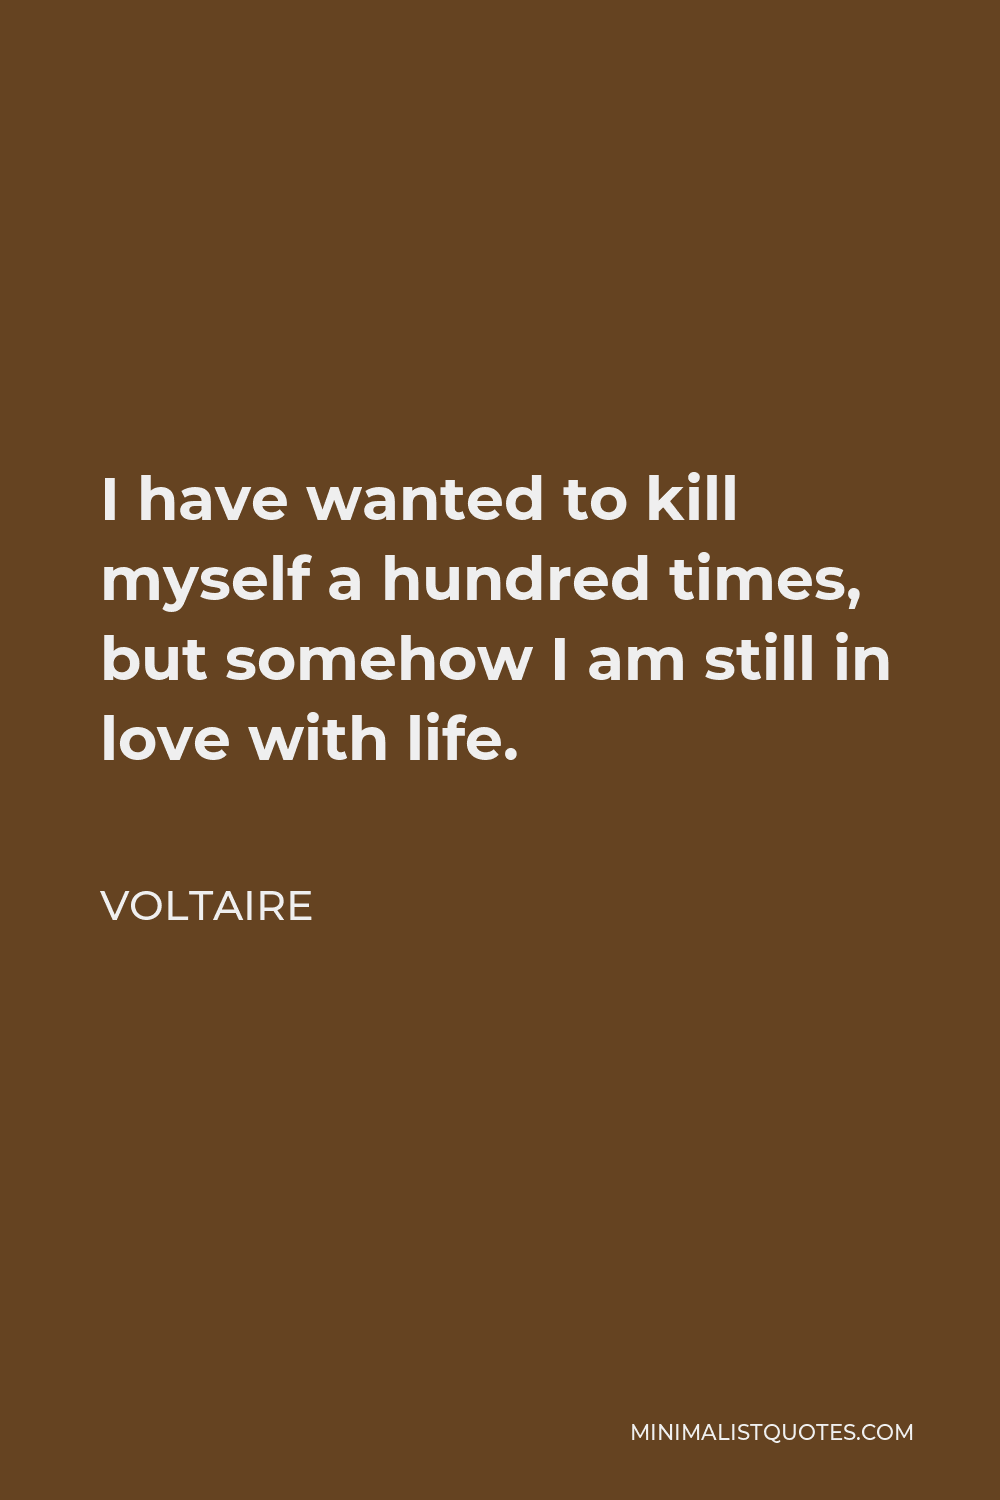 Voltaire Quote - I have wanted to kill myself a hundred times, but somehow I am still in love with life.